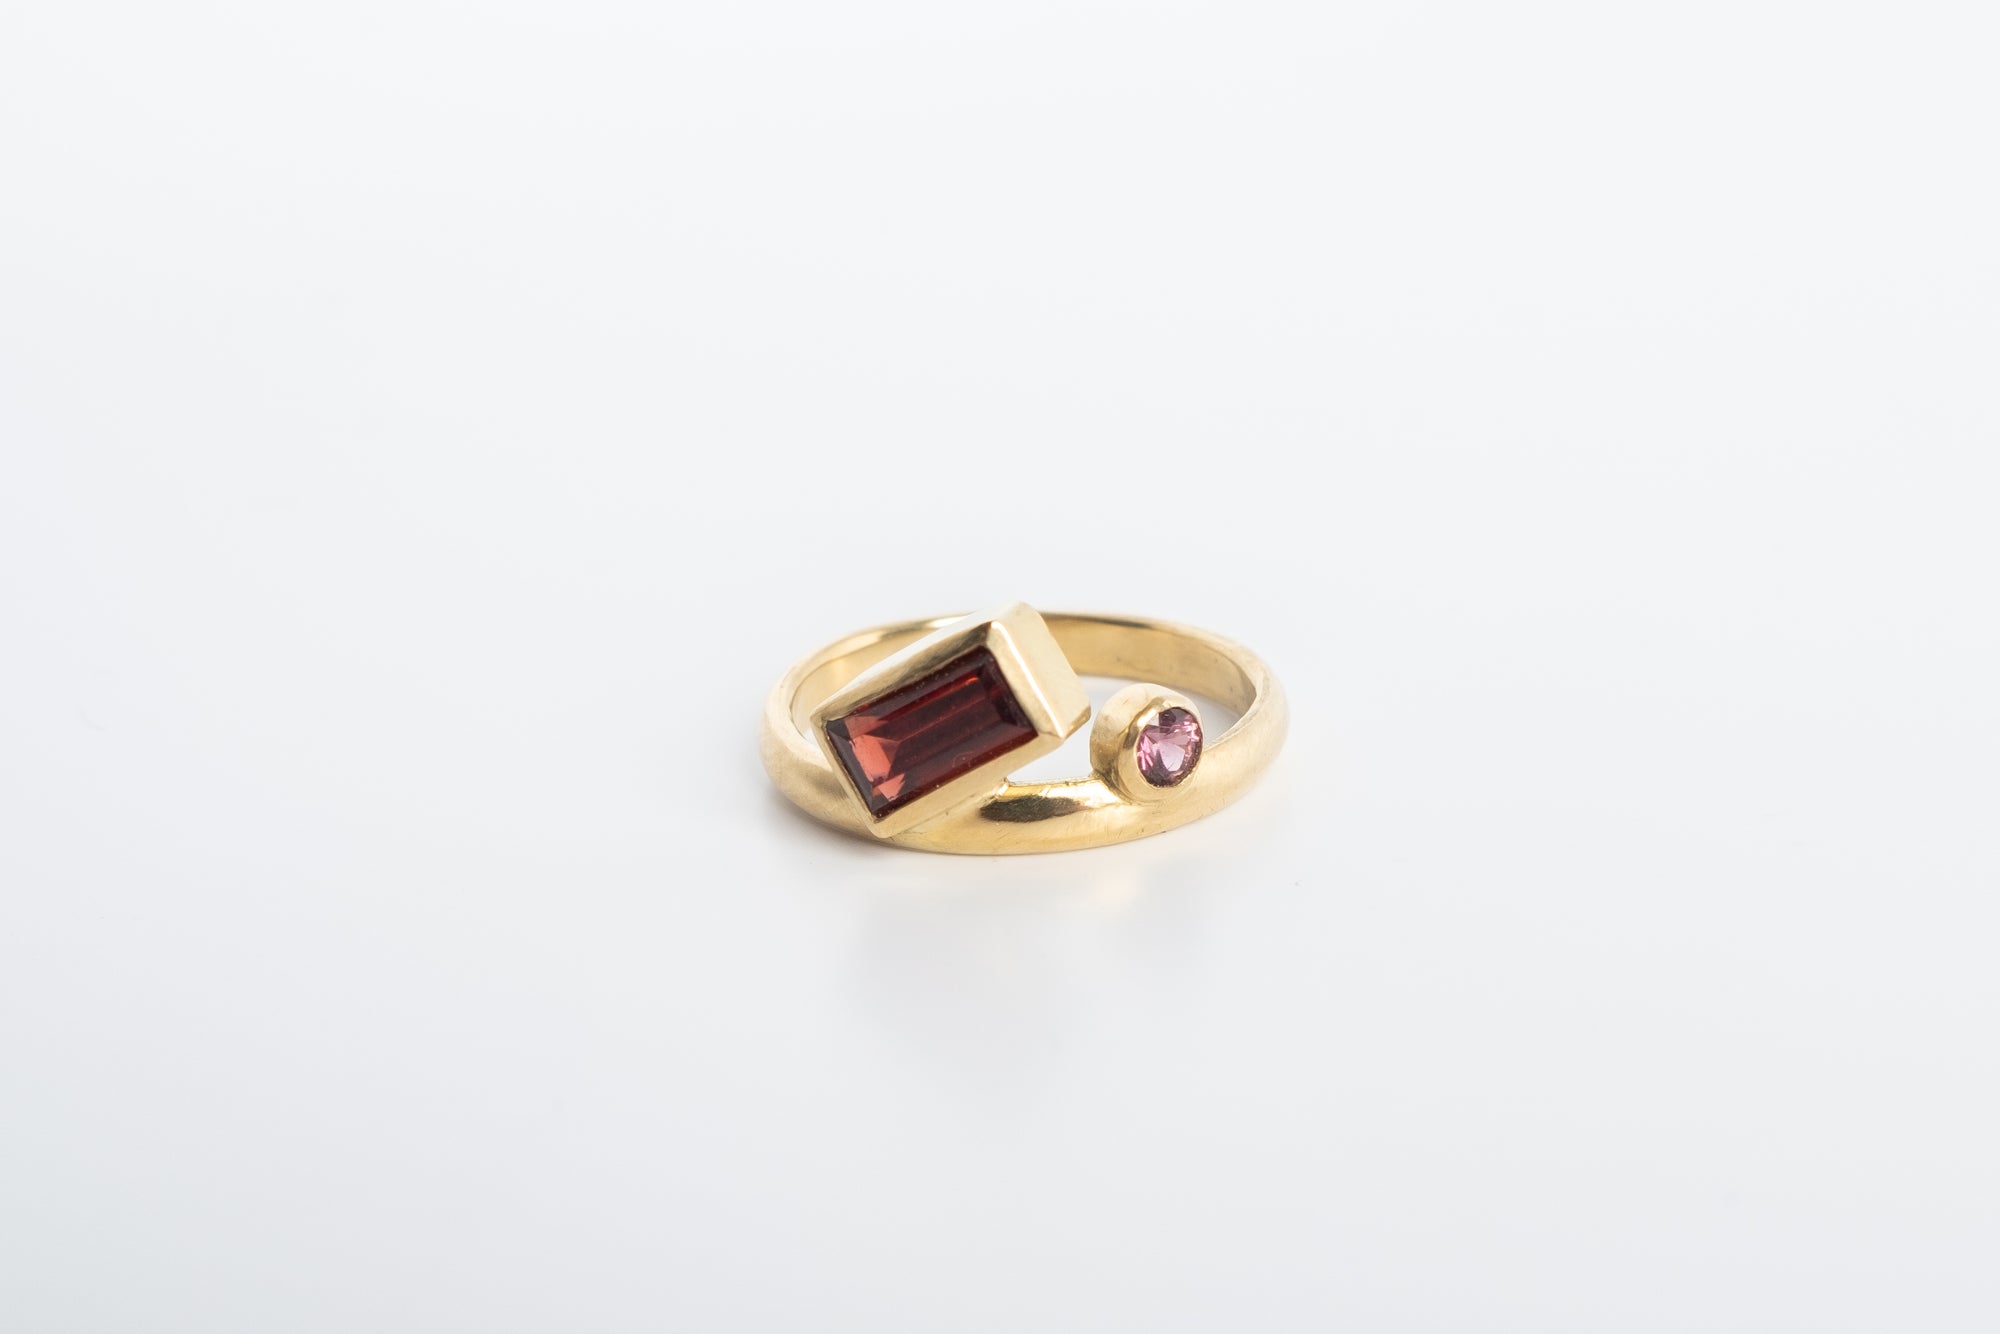 Gold ring with baguette cut garnet bezel set at a 45 degree angle to the band and a small 3mm round sapphire bezel set next to it, offset to sit above the ring band